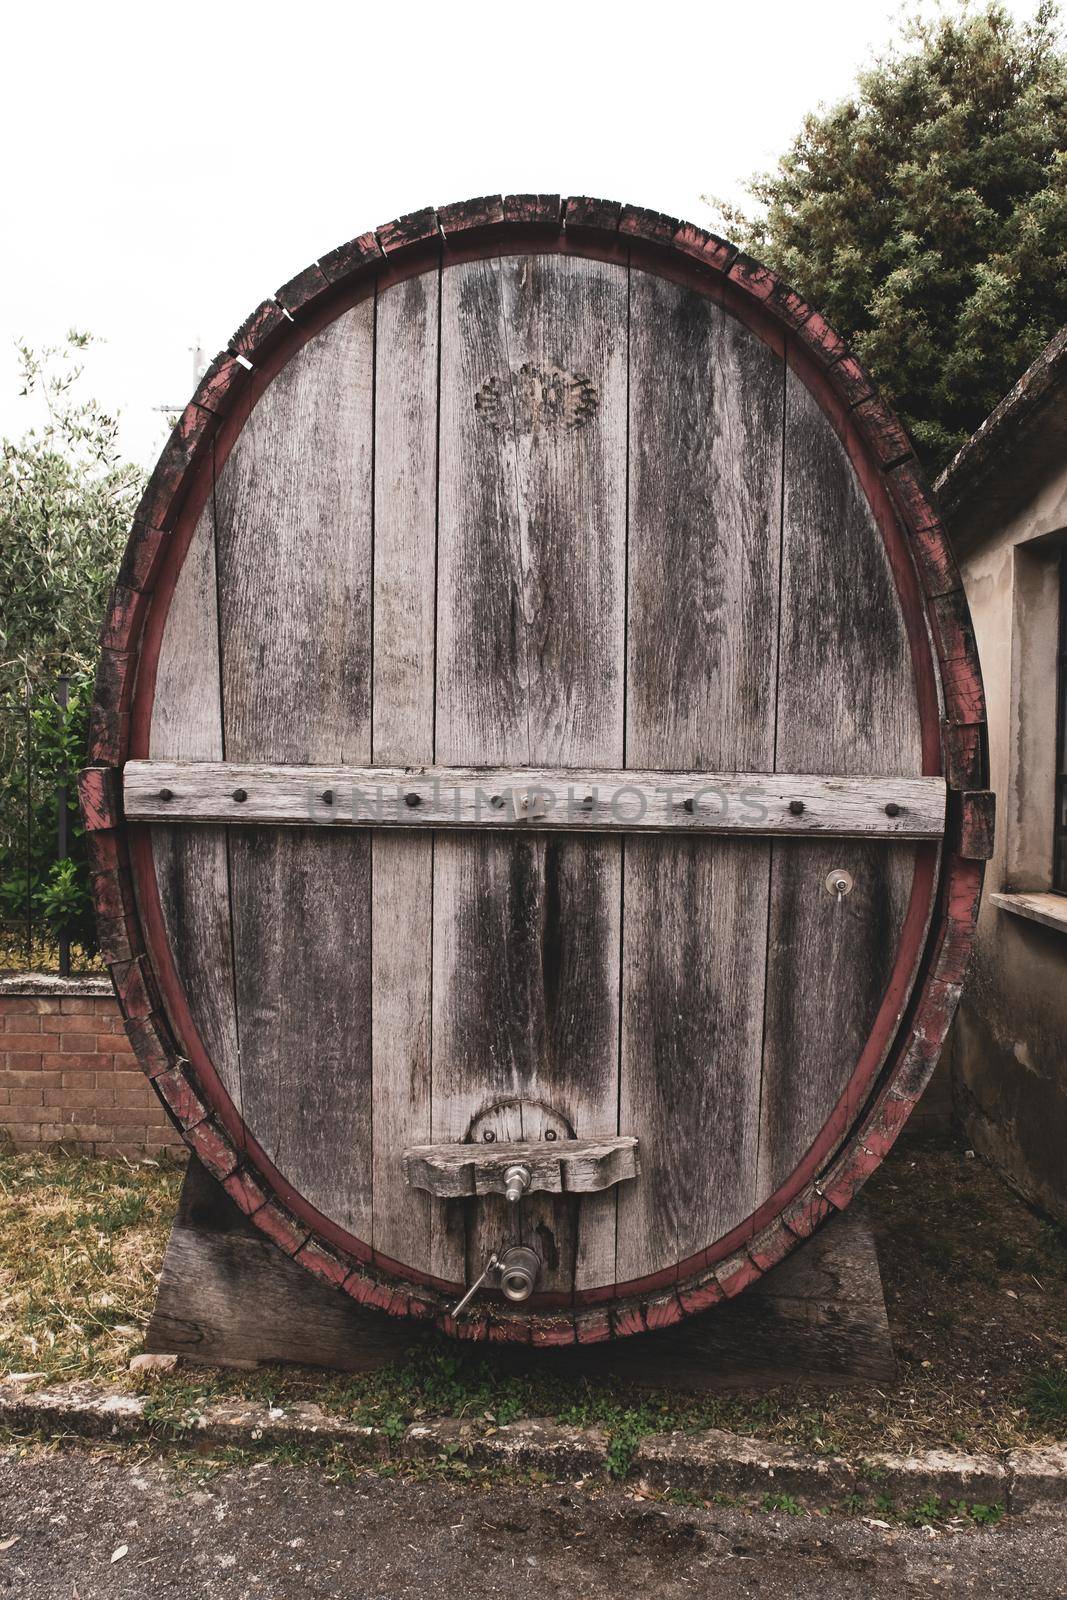 Close up of a huge wooden barrel for wine, Tuscany, Italy. by silentstock639